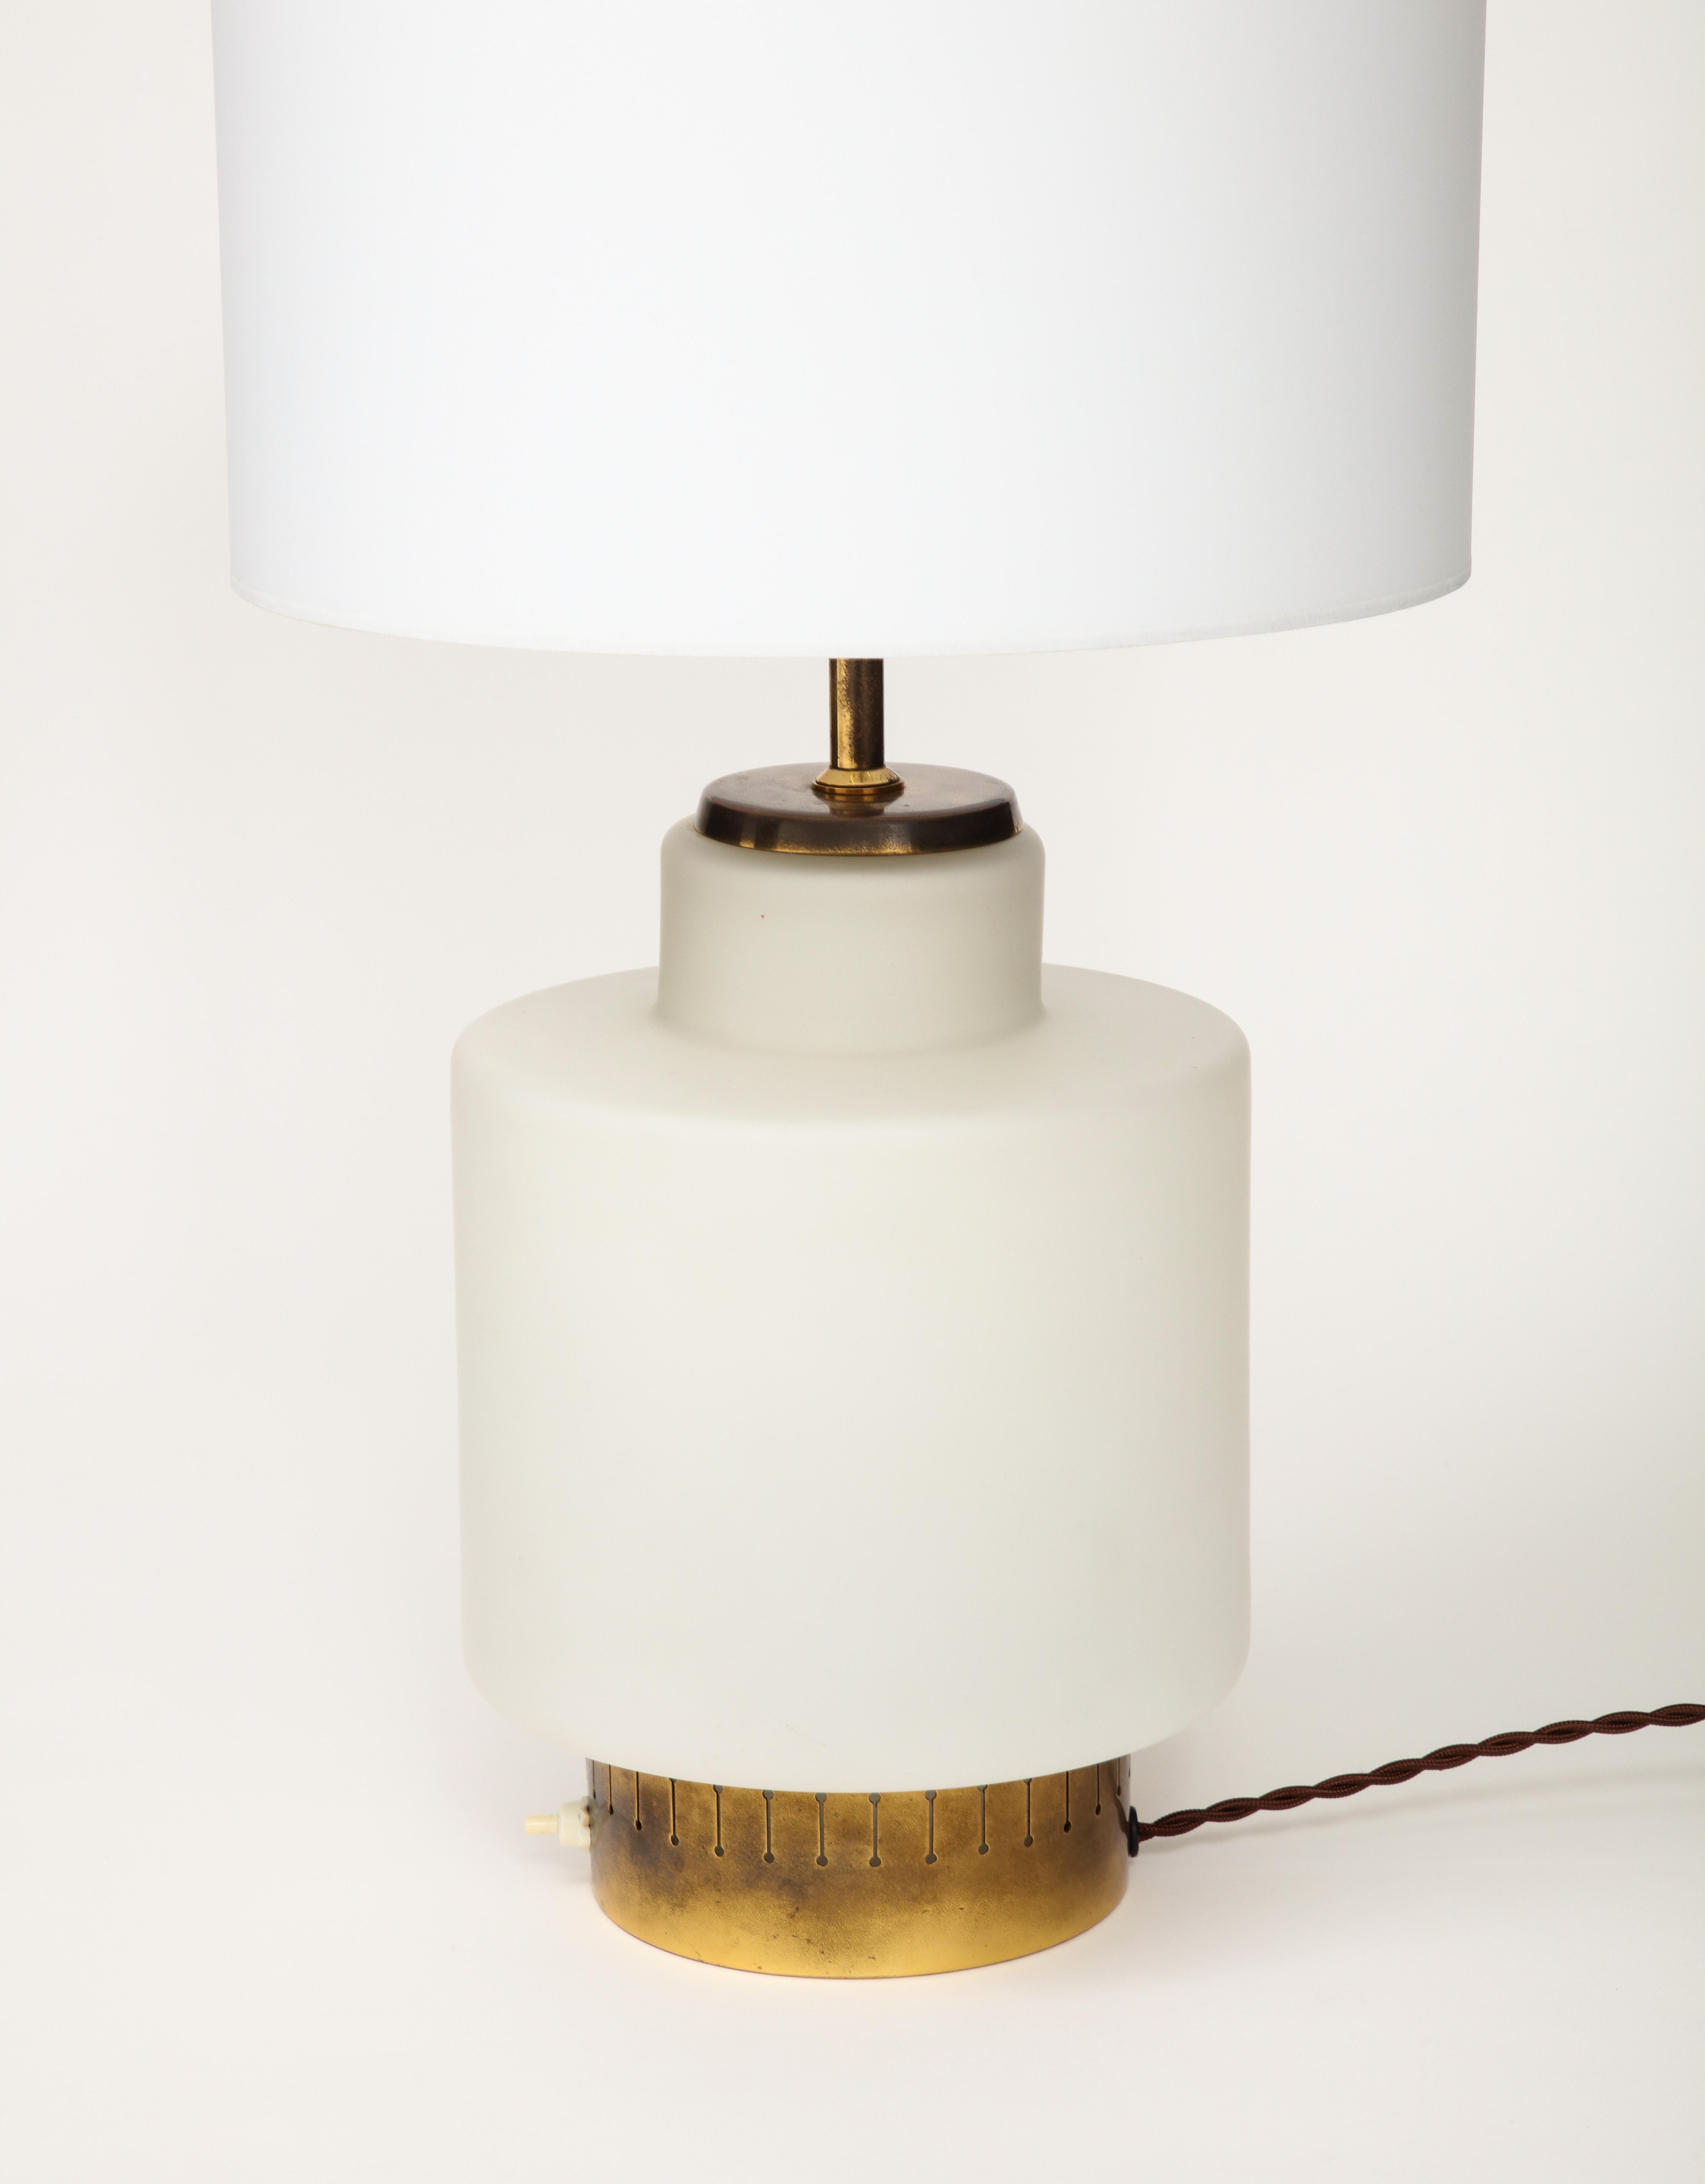 Stilnovo Opaline & Brass Lamp, mod. 8055, Parchment Shade, Italy, c. 1950's For Sale 2